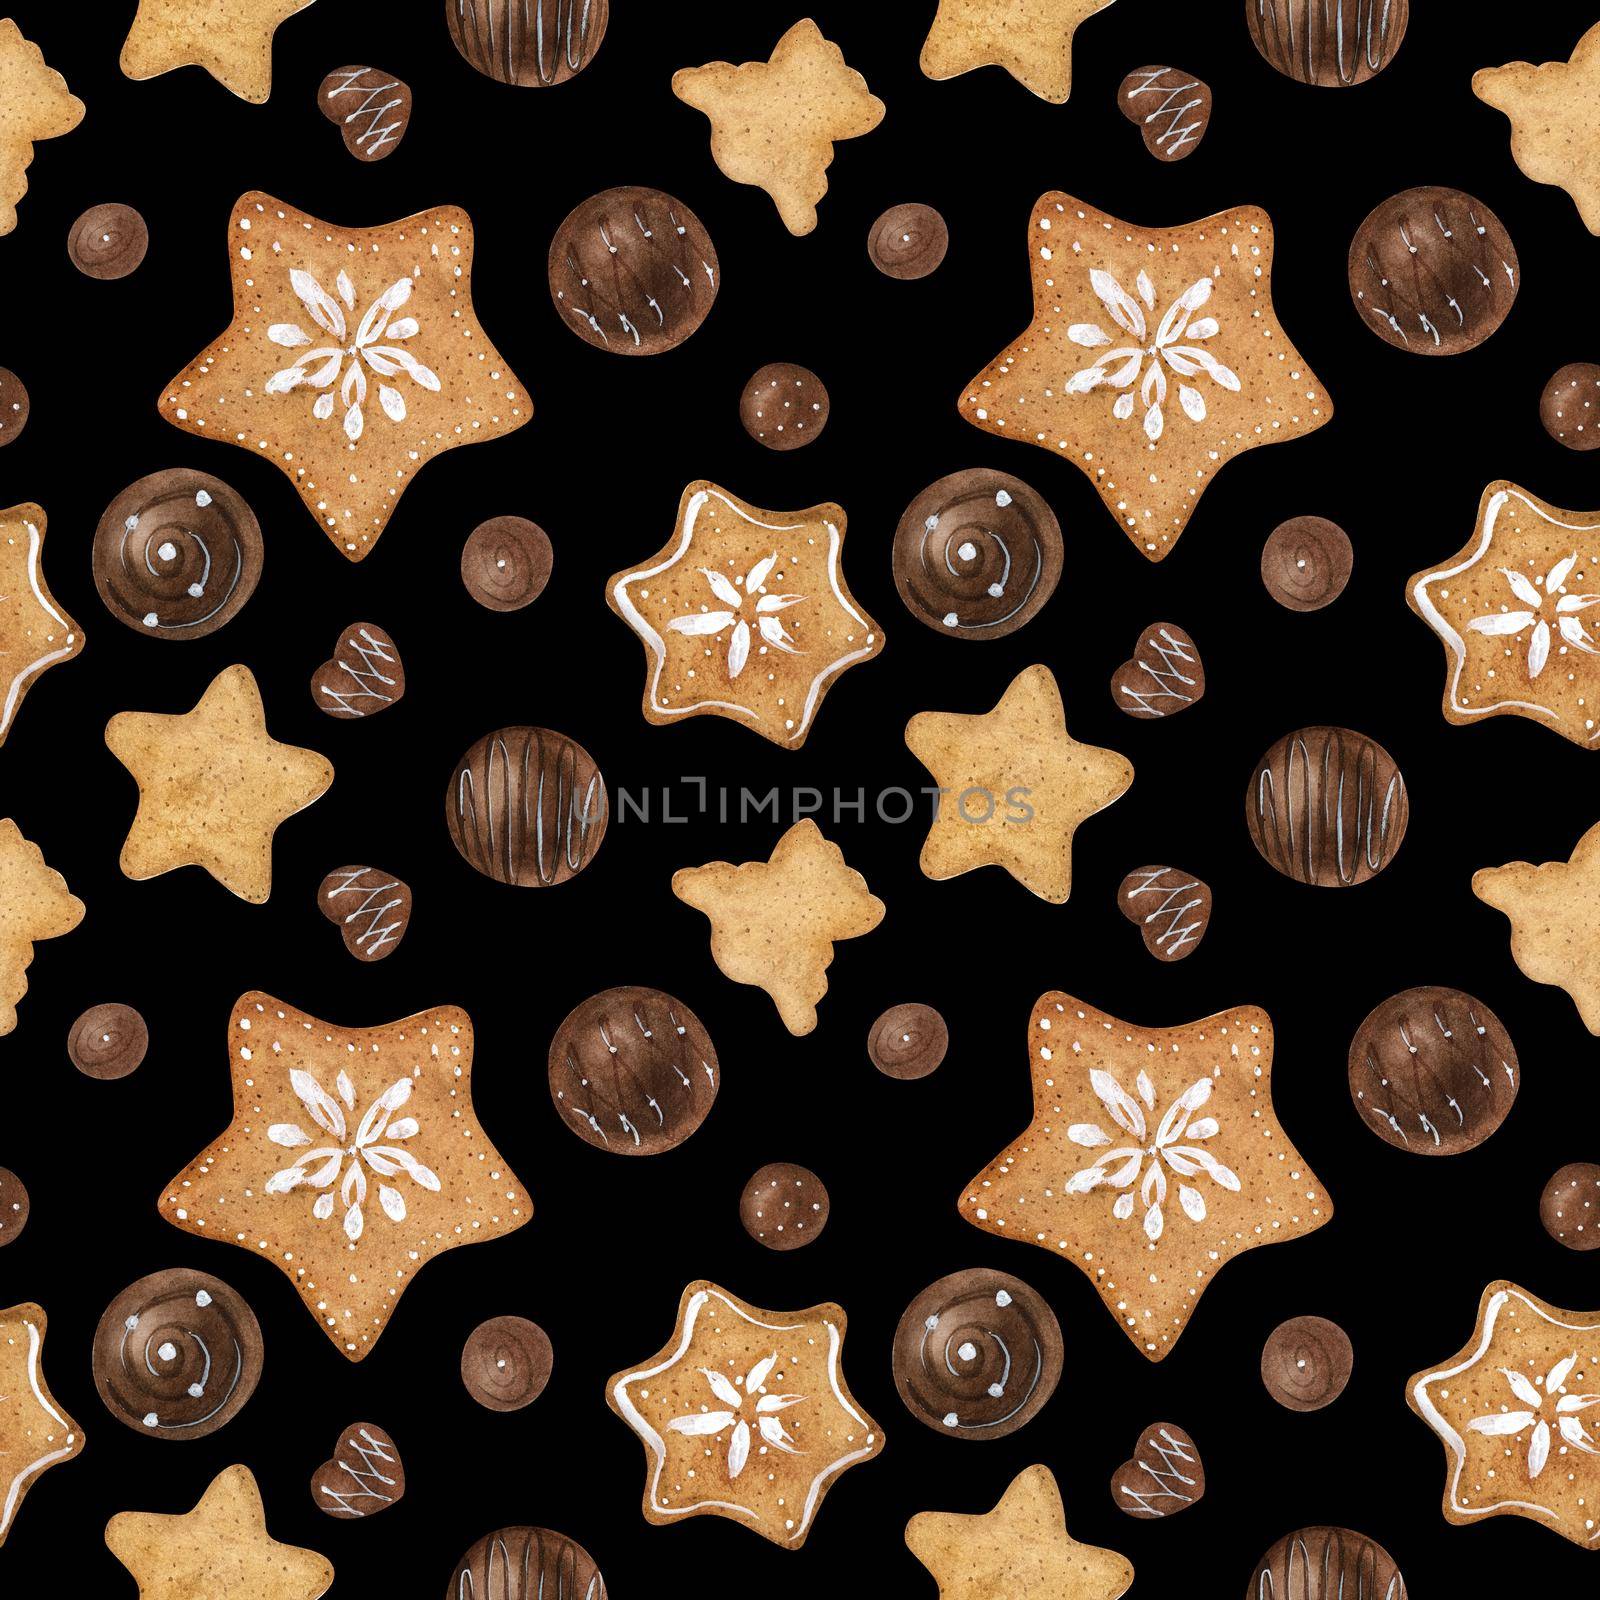 Sweet winter seamless pattern with chocolate candies and cookies. Watercolor illustration for any event decoration, black background, path included